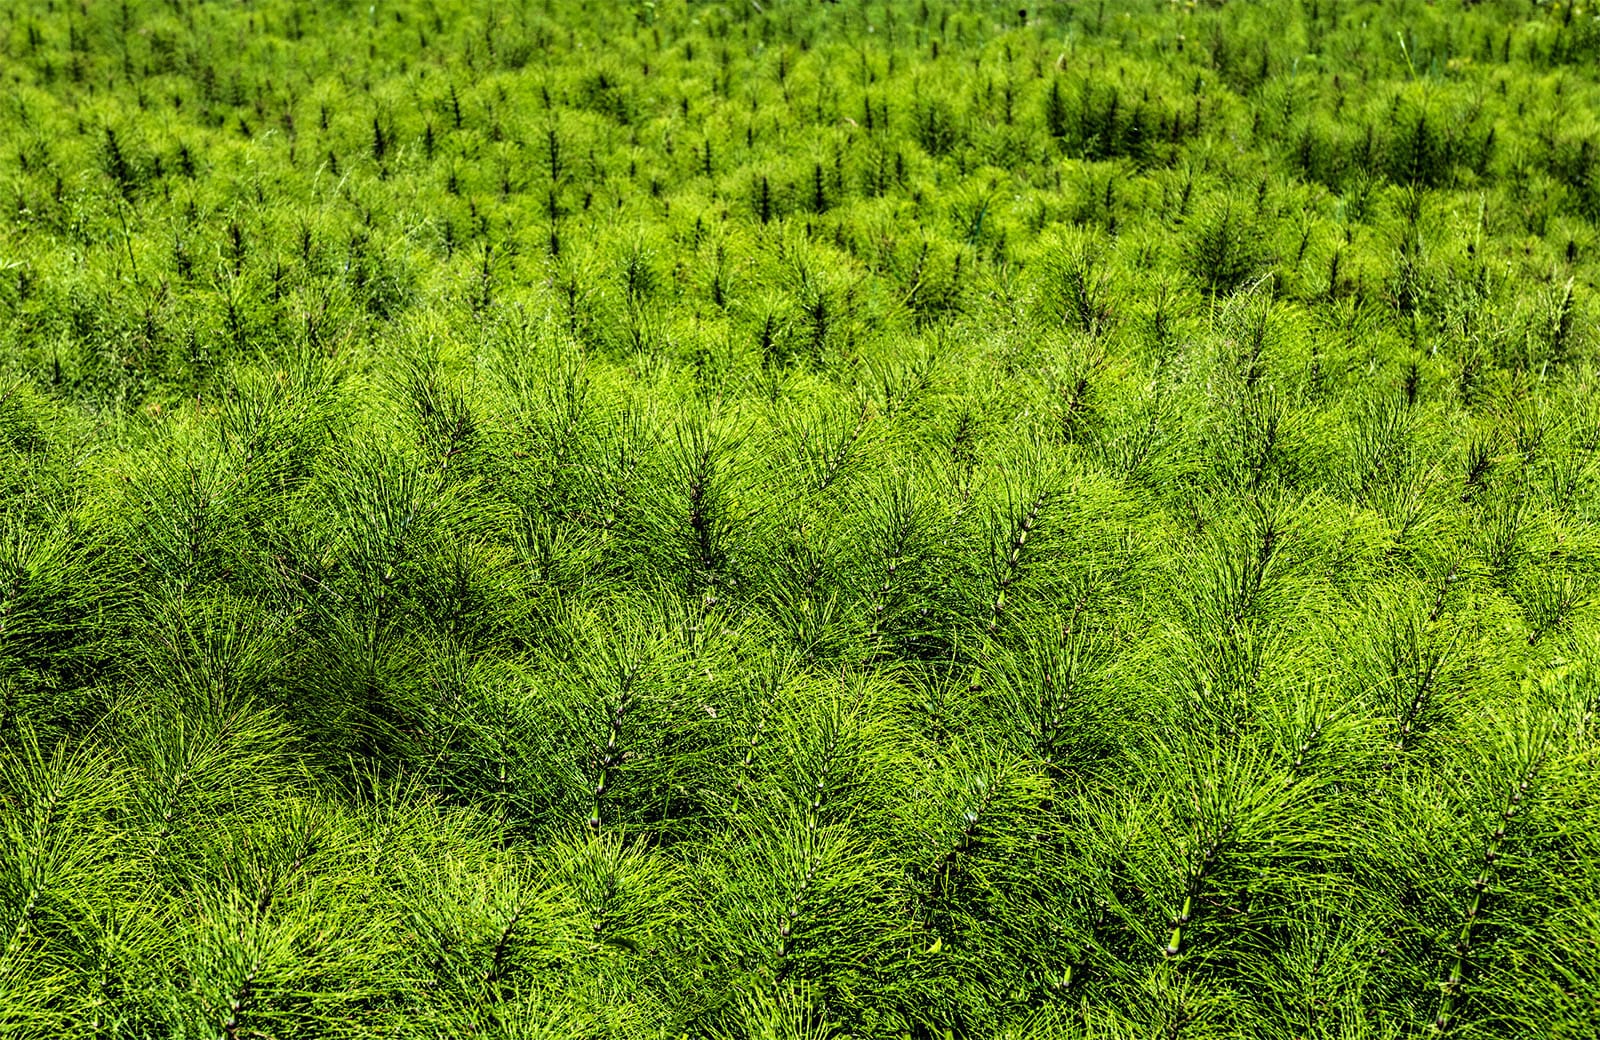 Infestation of mare's tail, also known as horsetail